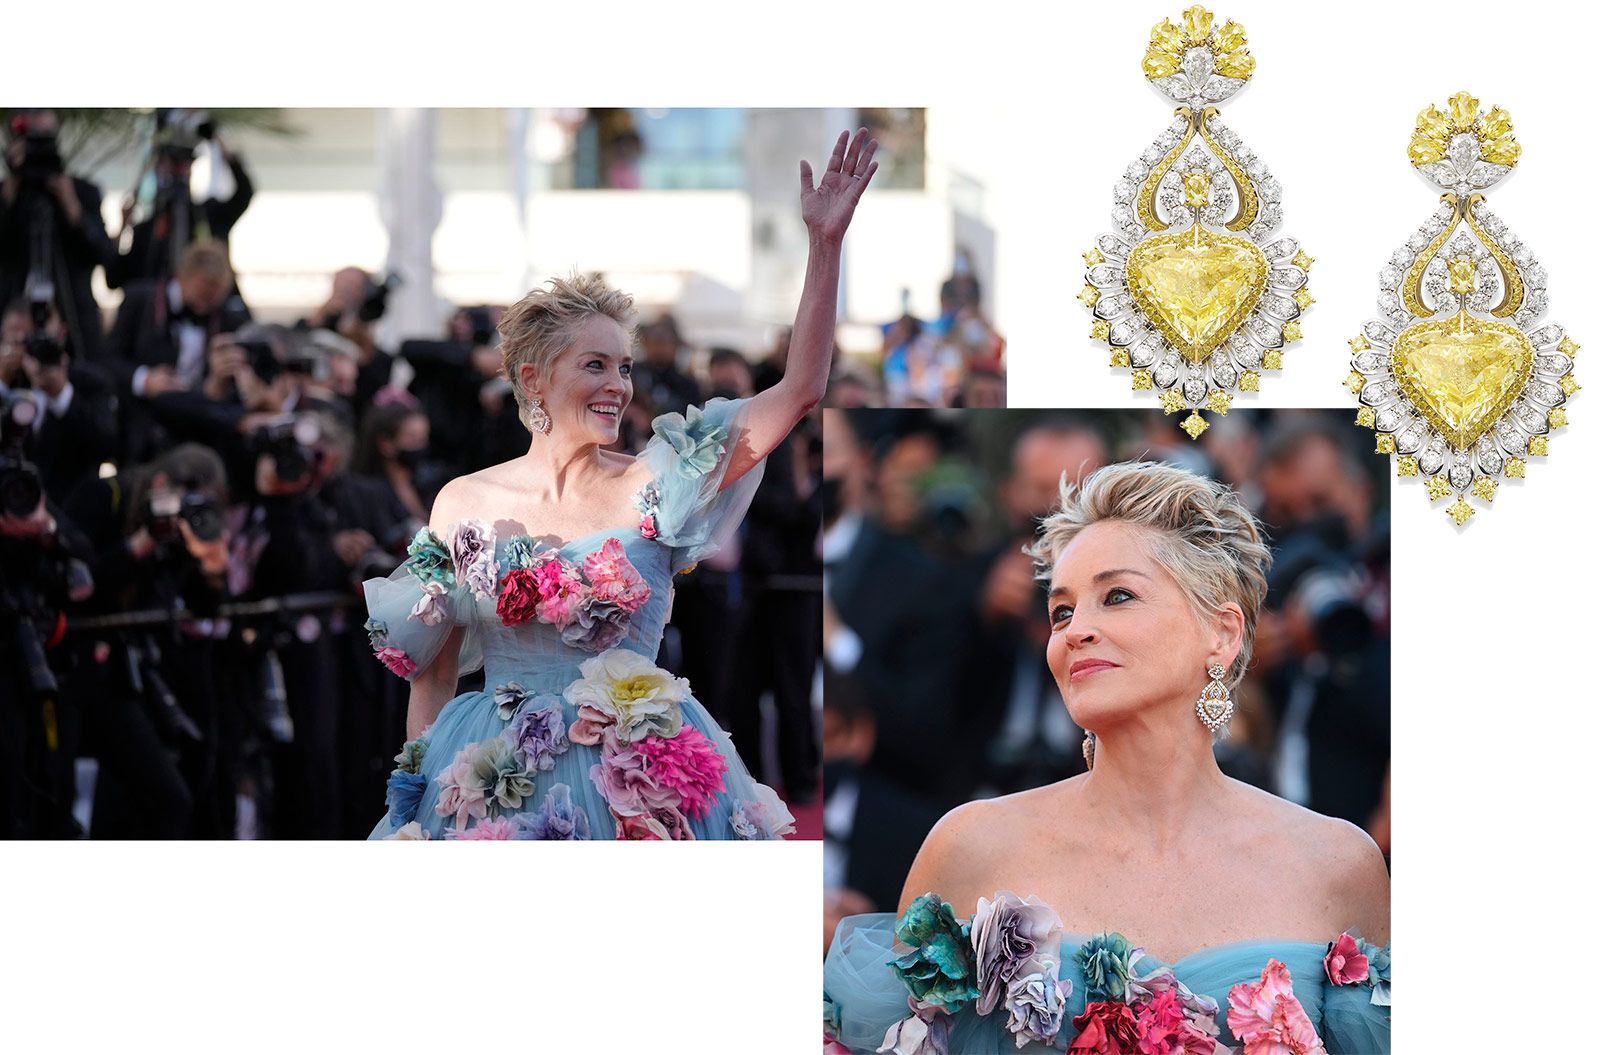 Actress Sharon Stone wears Chopard High Jewellery earrings at the Cannes Film Festival 2021